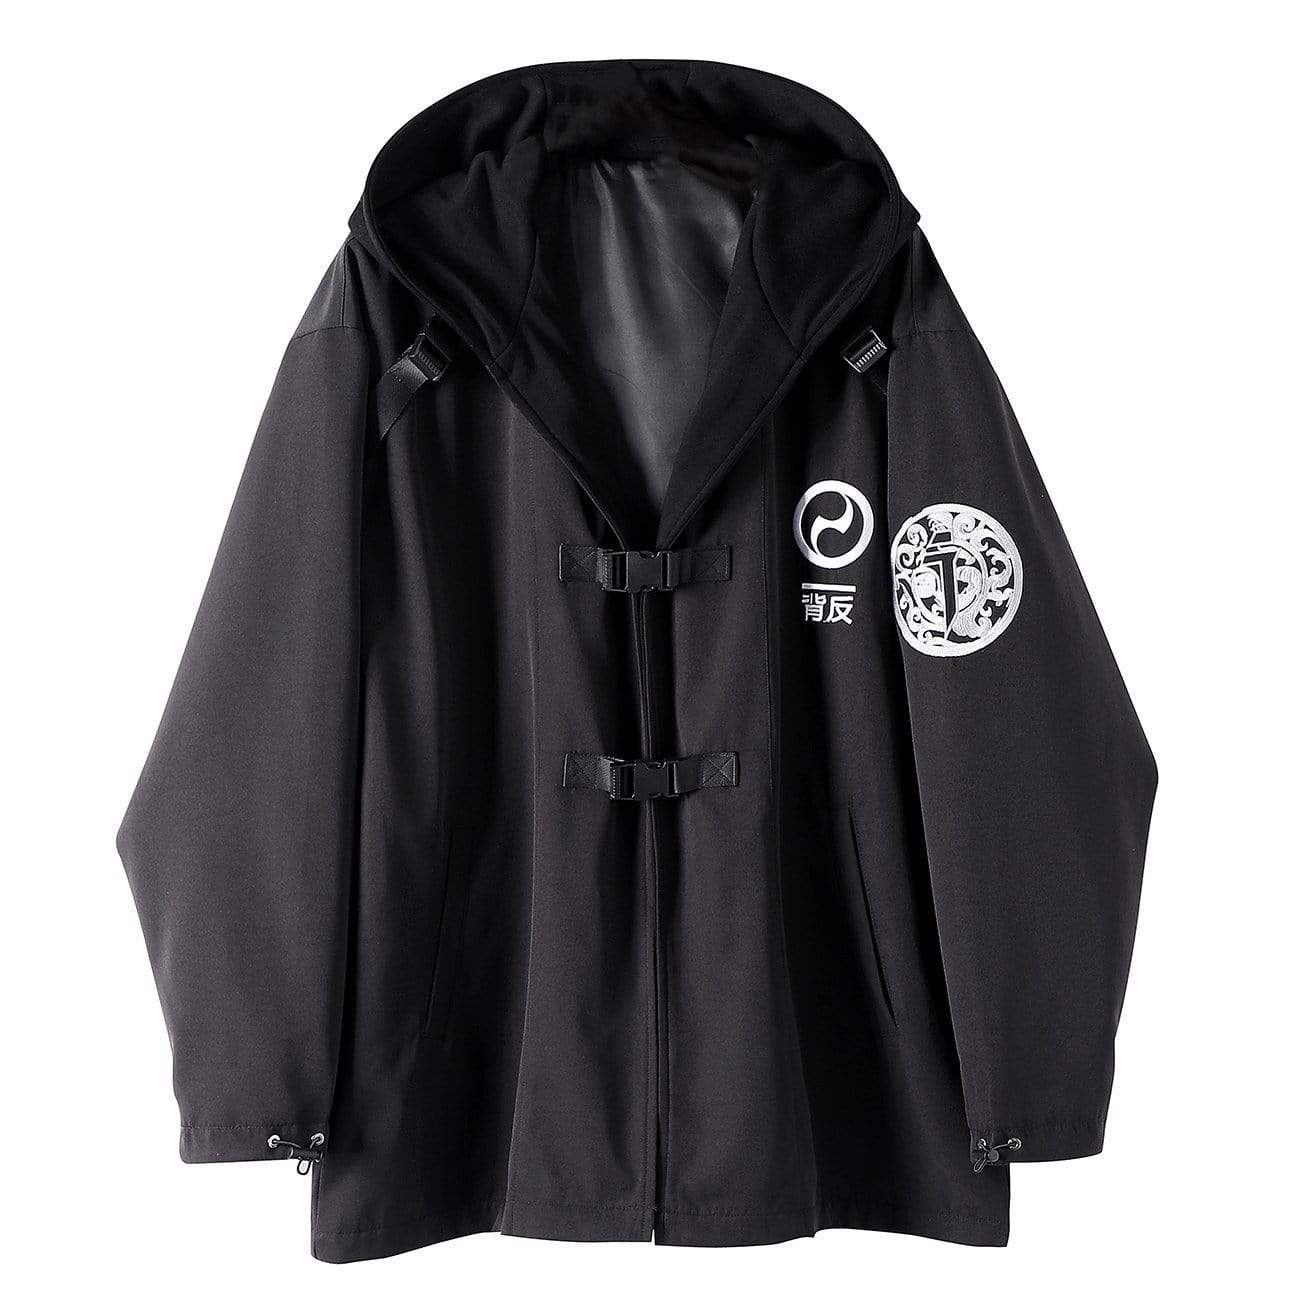 WLS Combat Funeral Embroidery Cardigan Jacket